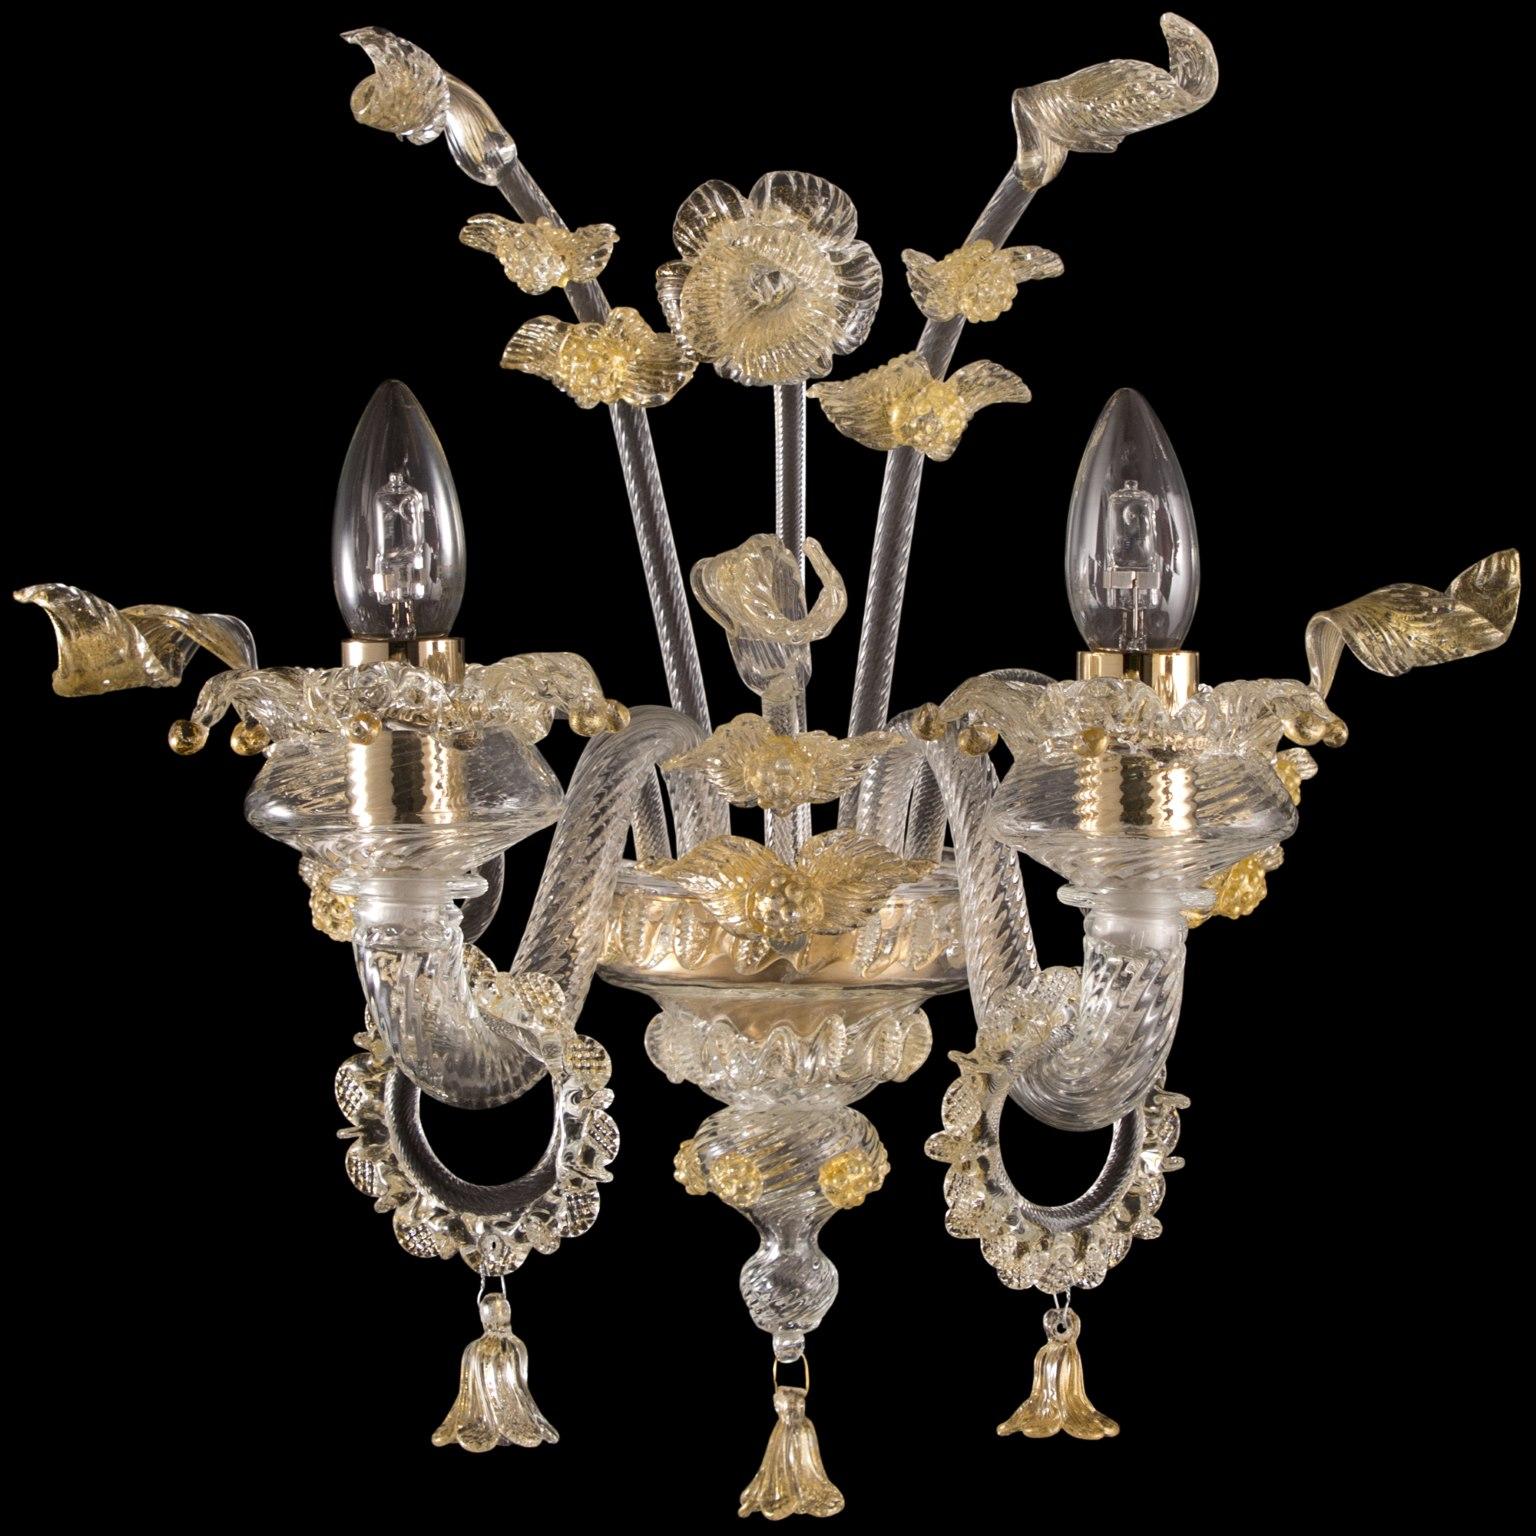 Rich Murano sconce 2 Arms crystal and gold Murano Glass Fenix by Multiforme.
The blown glass chandelier Fenix, with its floral style, harks back to the venetian classic tradition. The decorative elements are characterized by flowers modelled petal